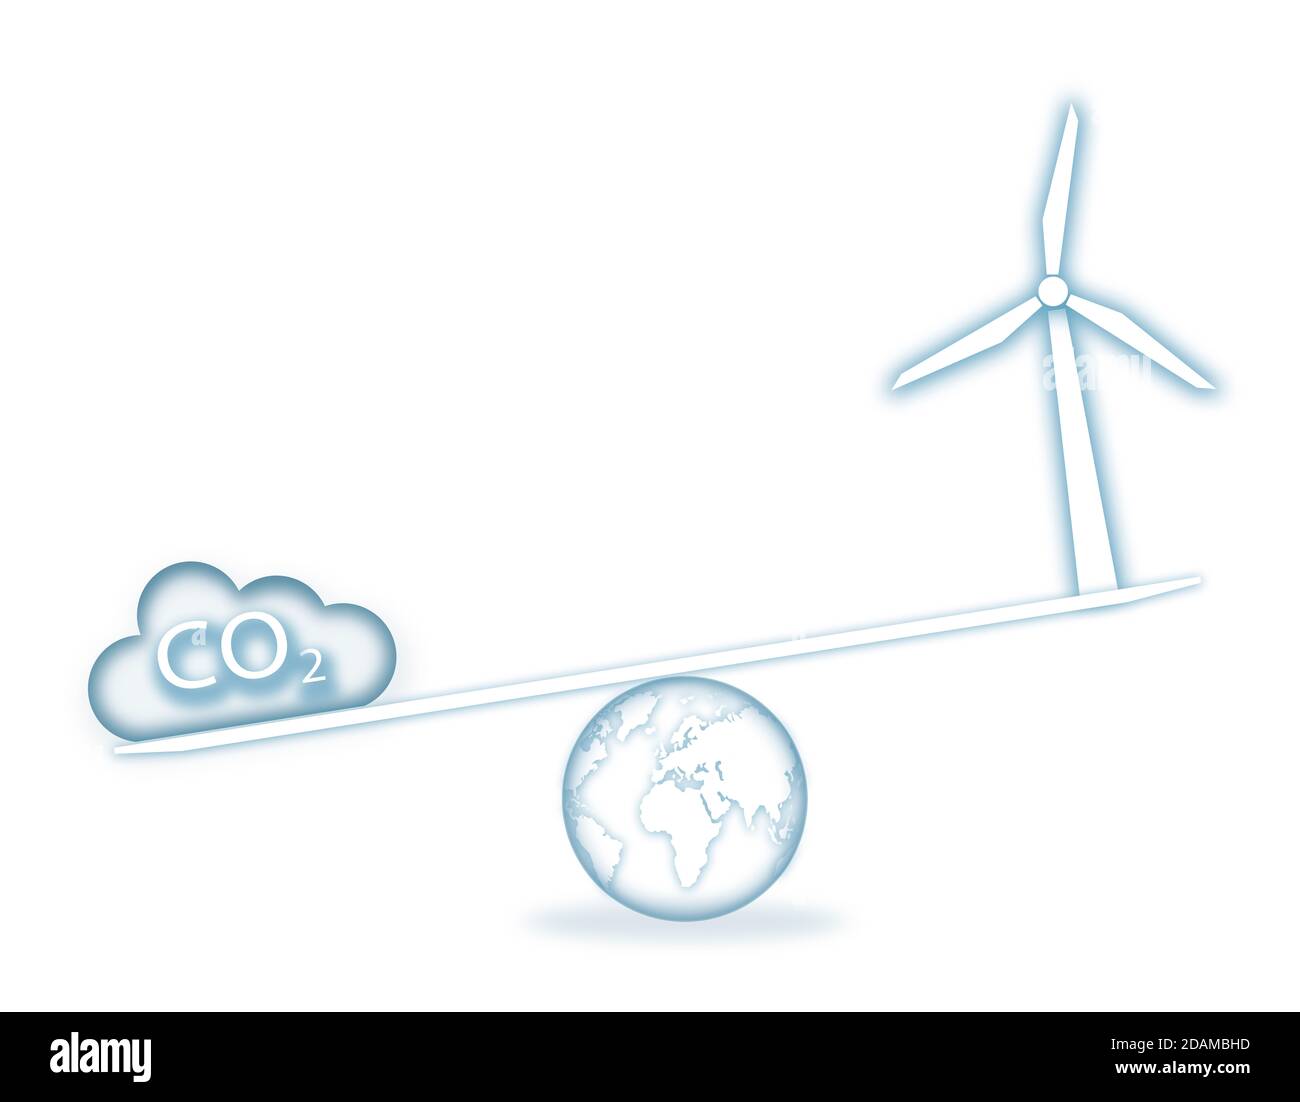 Scales with carbon cloud and wind turbine, illustration. Stock Photo